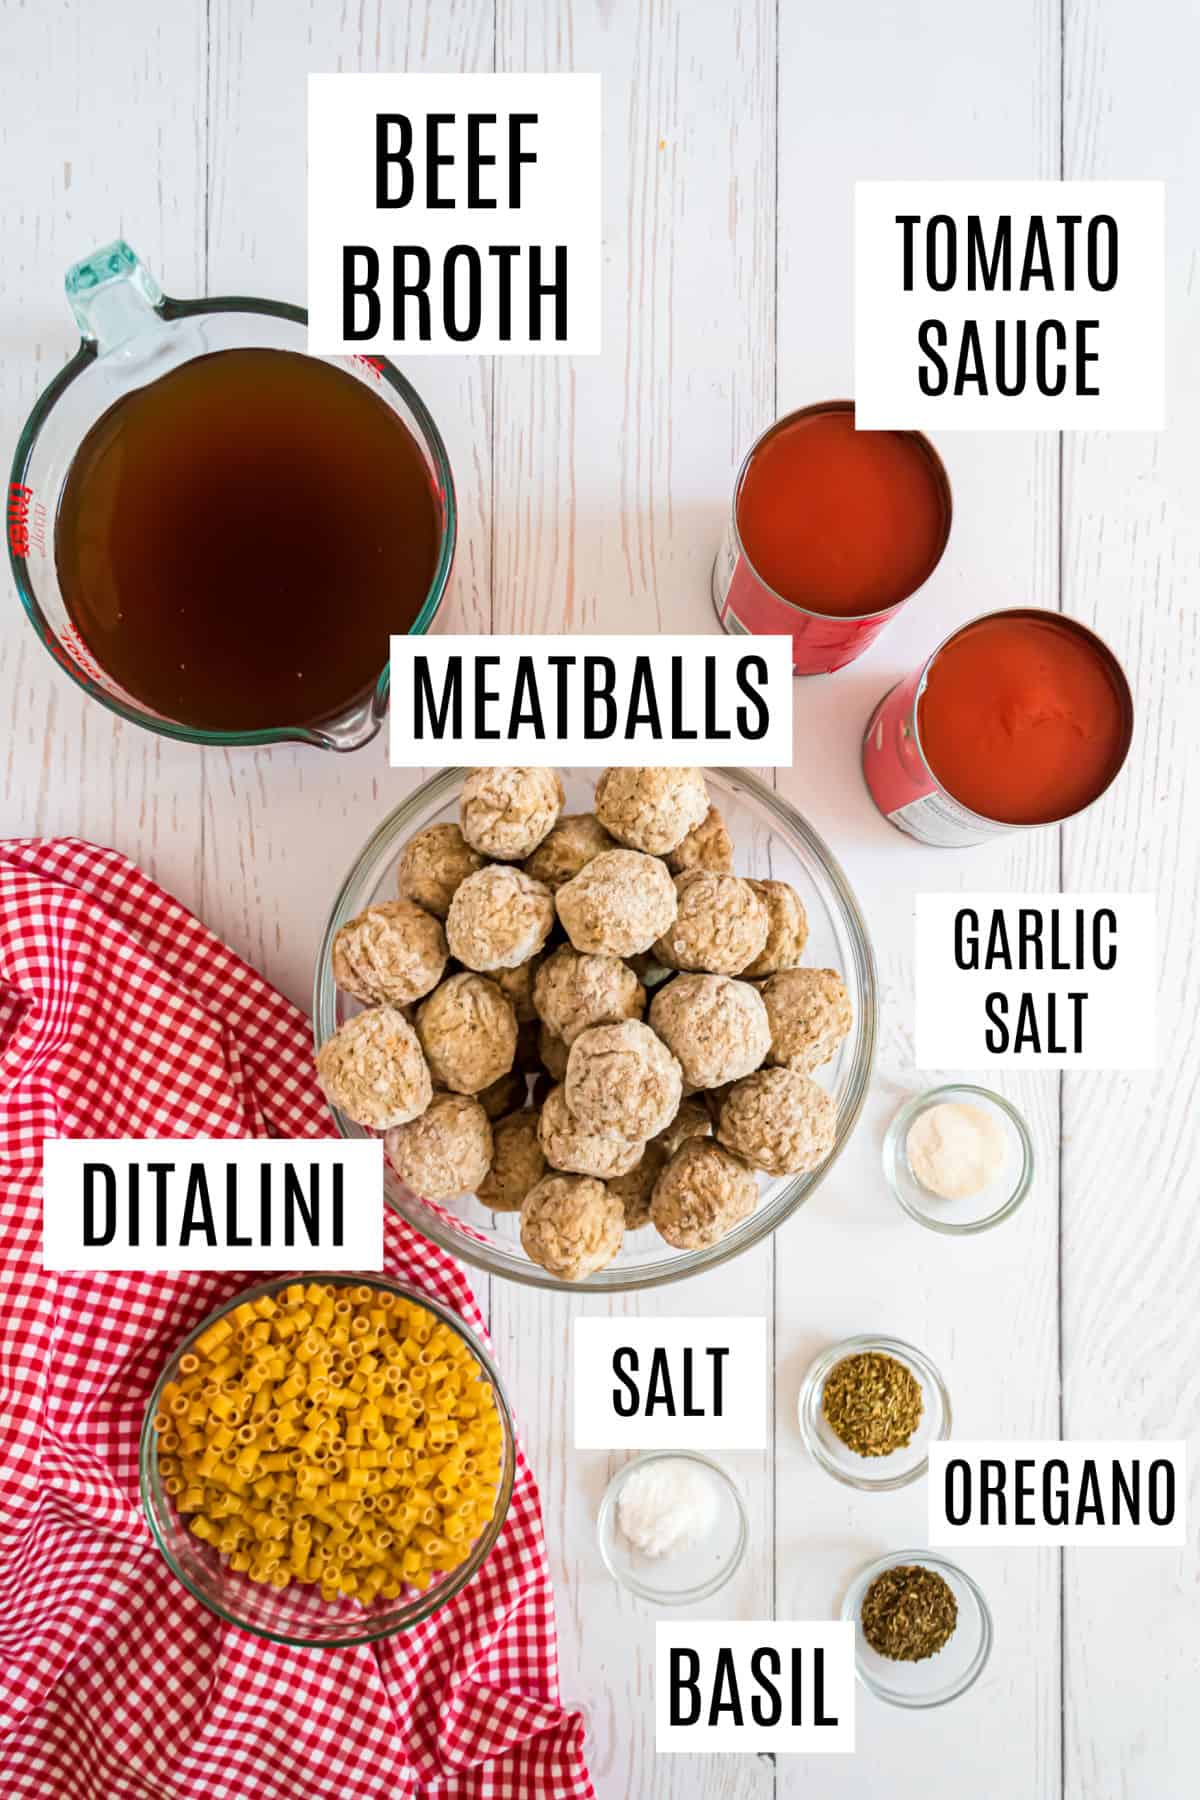 Ingredients needed to make spaghettios and meatballs.